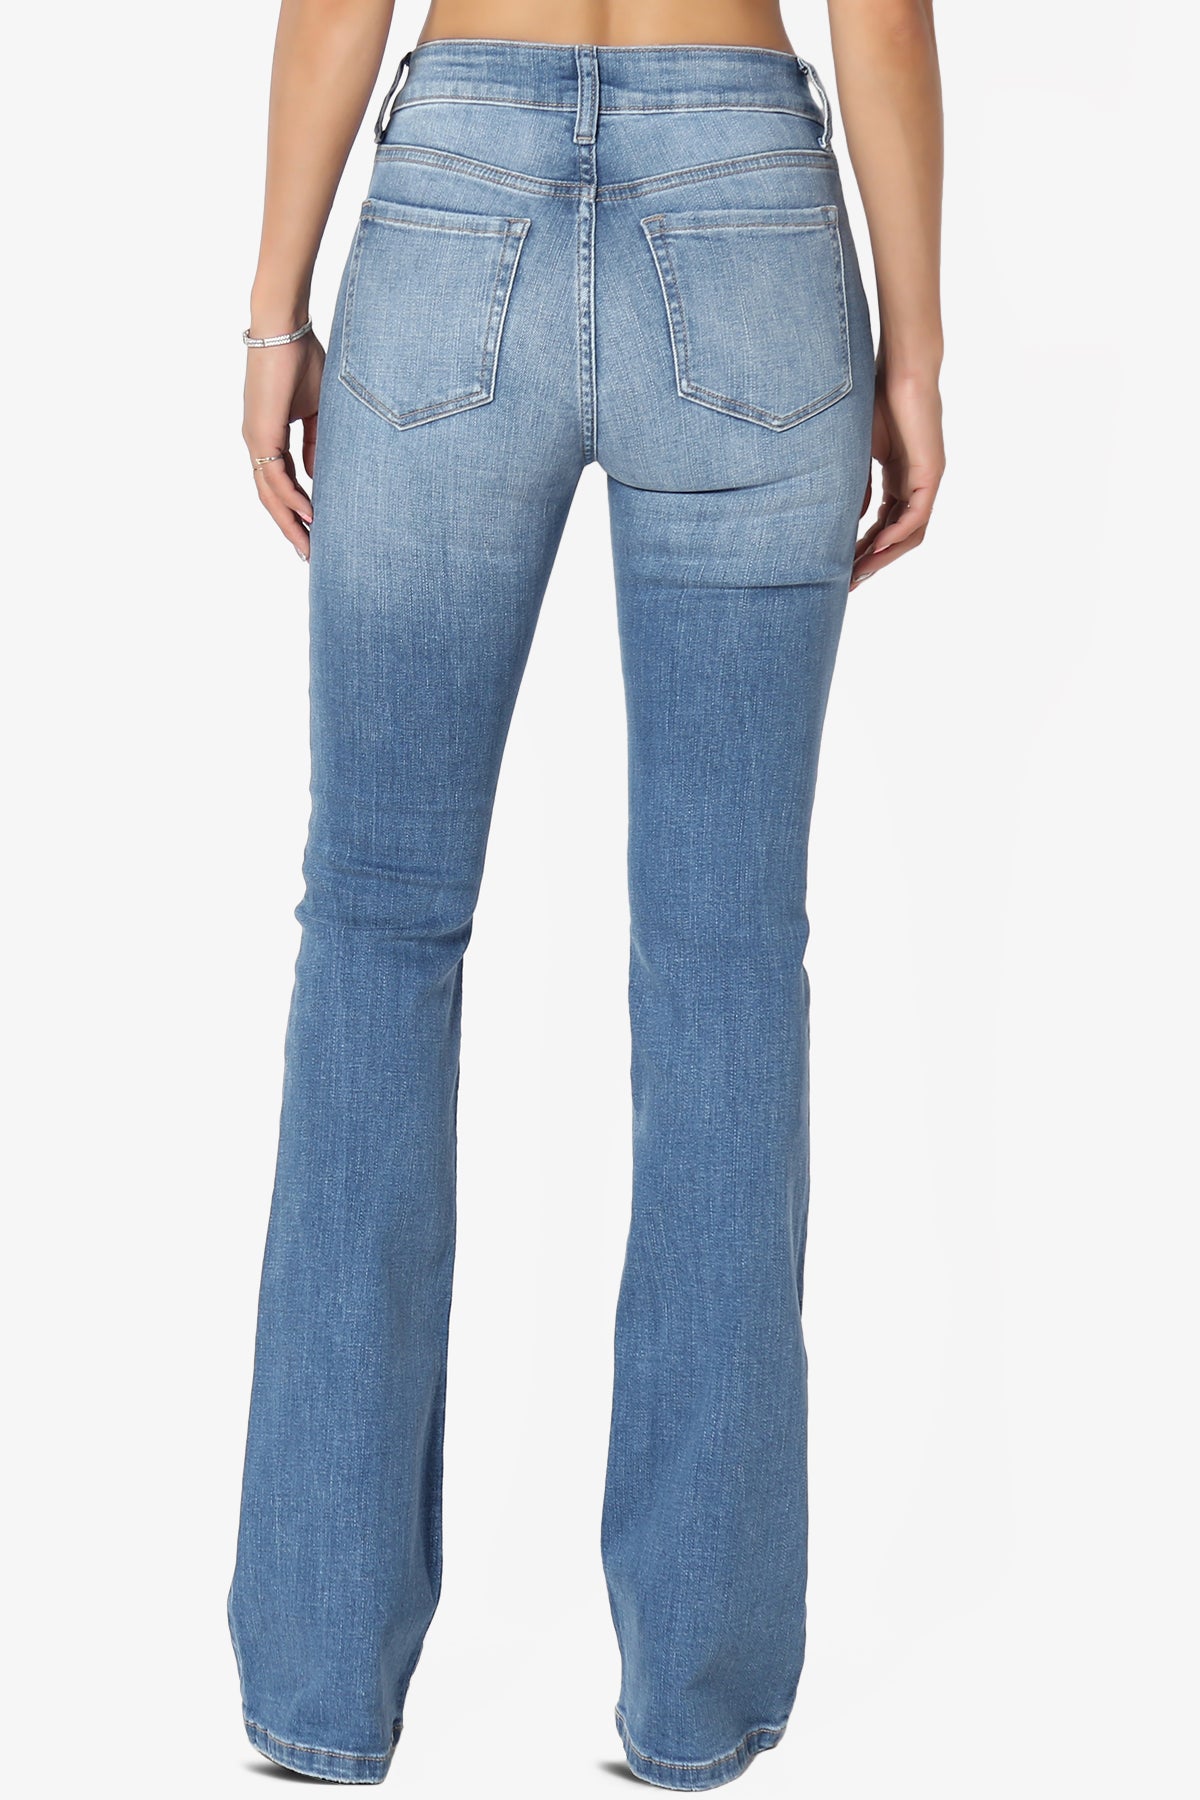 Clyde Washed Mid Rise Boot Cut Jeans in Med